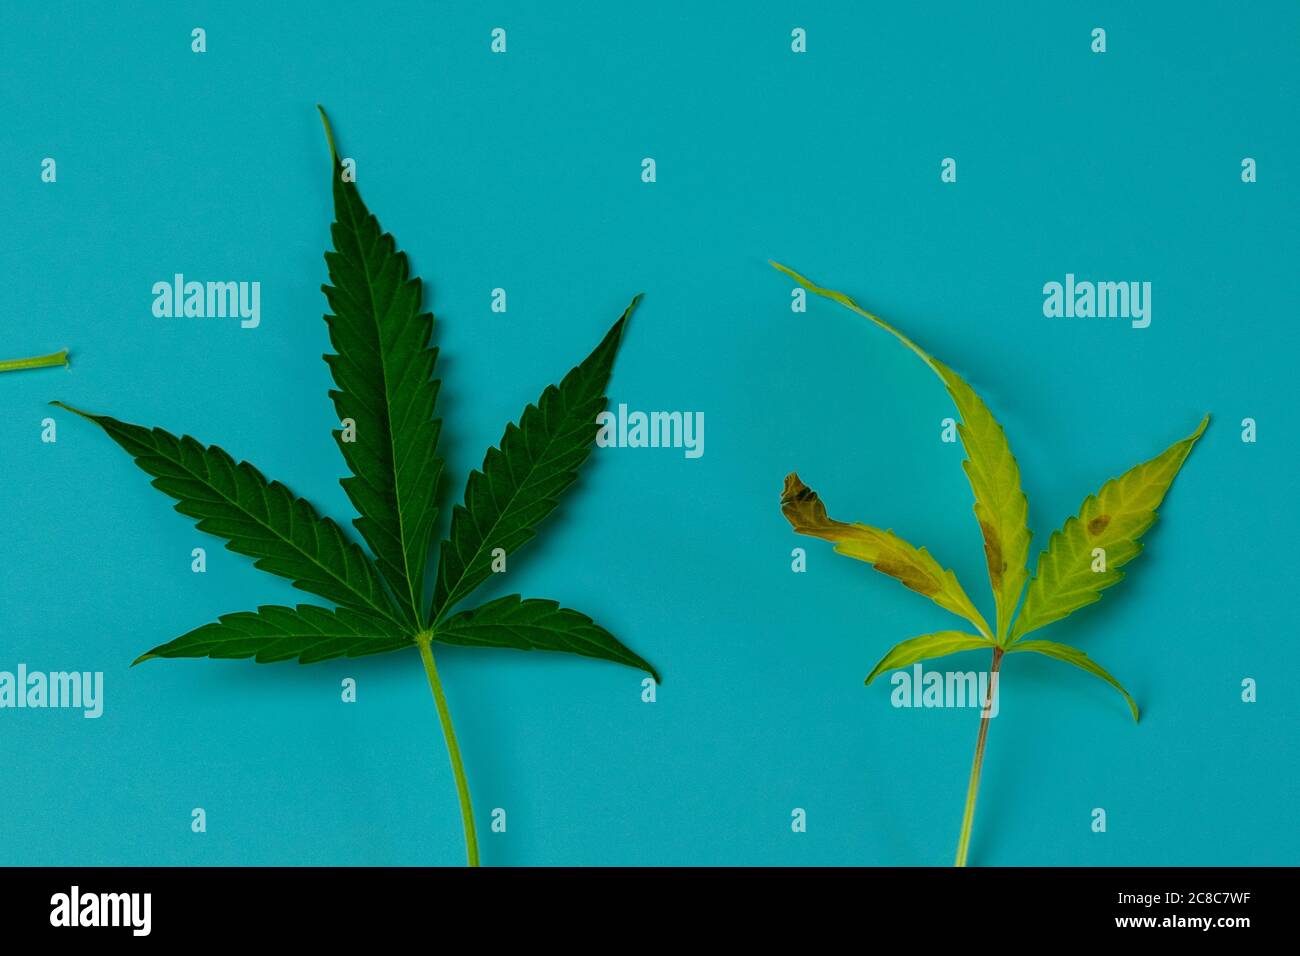 Green cannabis healthy leaf and withered dying yellow marijuana. Weed on blue background Stock Photo